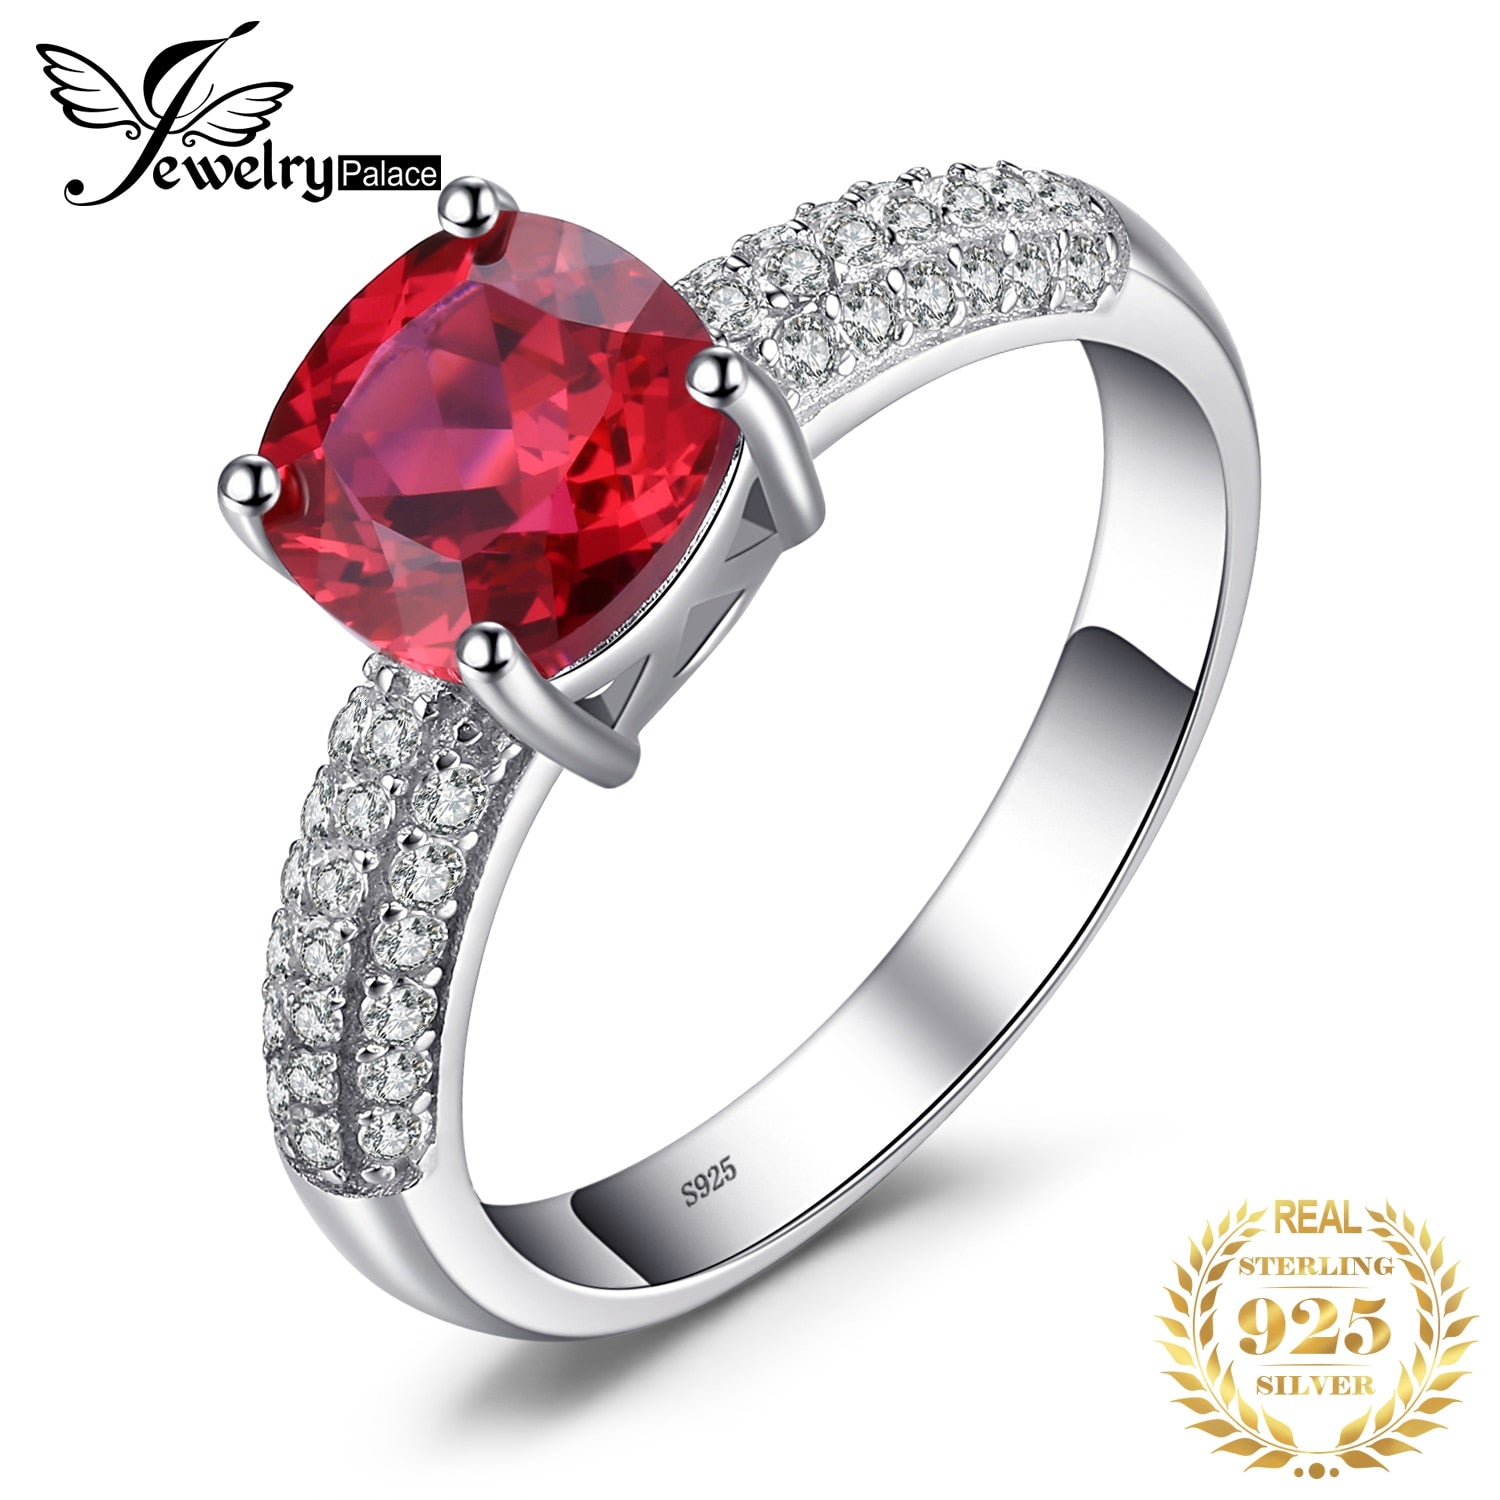 JewelryPalace 2.2ct Created Red Ruby 925 Sterling Silver Solitaire Engagement Ring for Women Cushion Cut Gemstone Wedding Gift 6